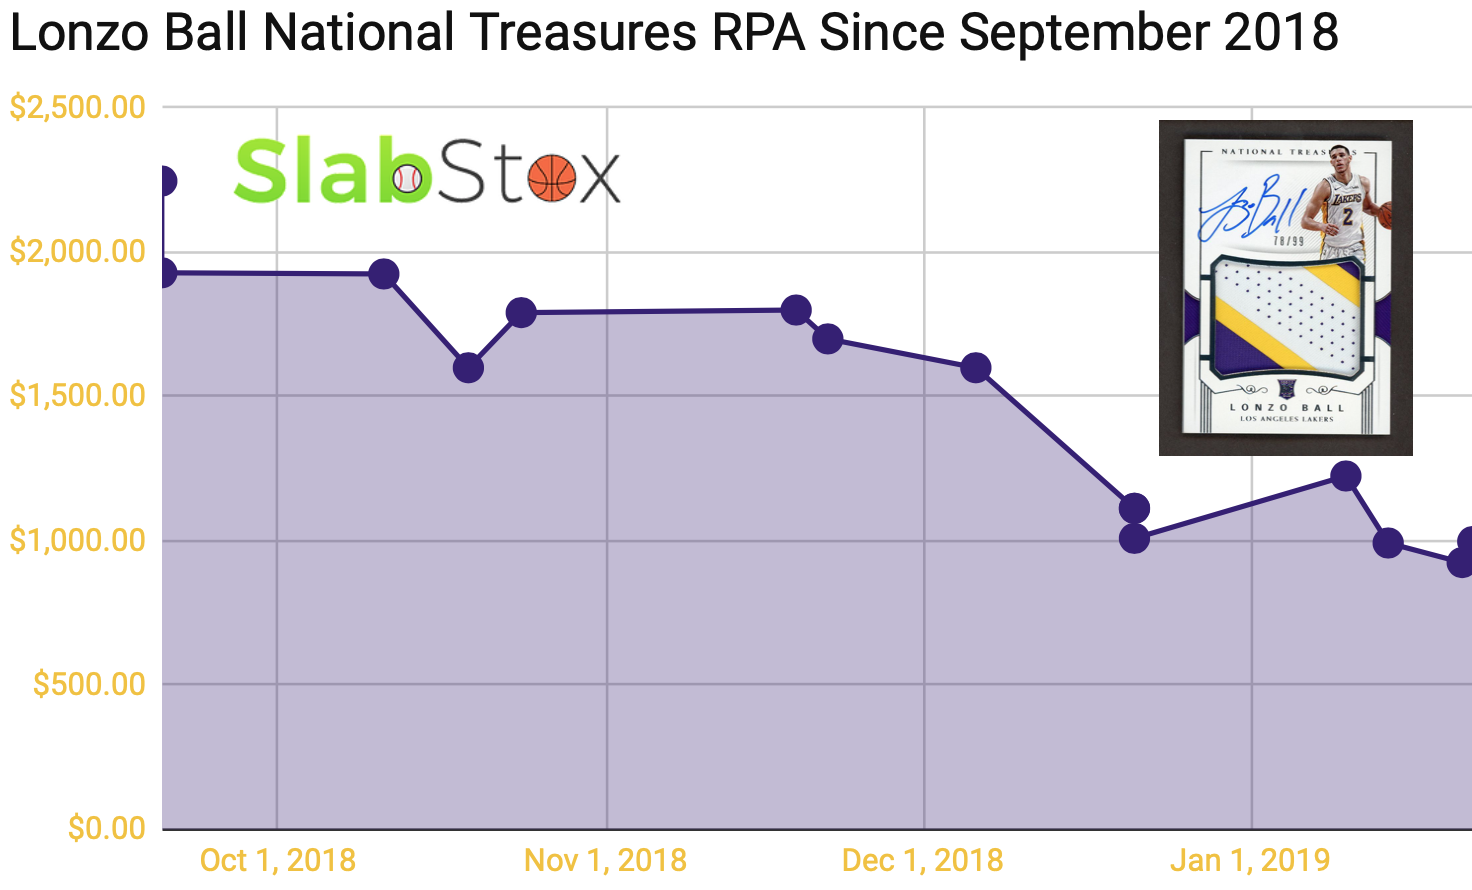 SlabStox infographic for Lonzo Ball National Treasures RPA since September 2018